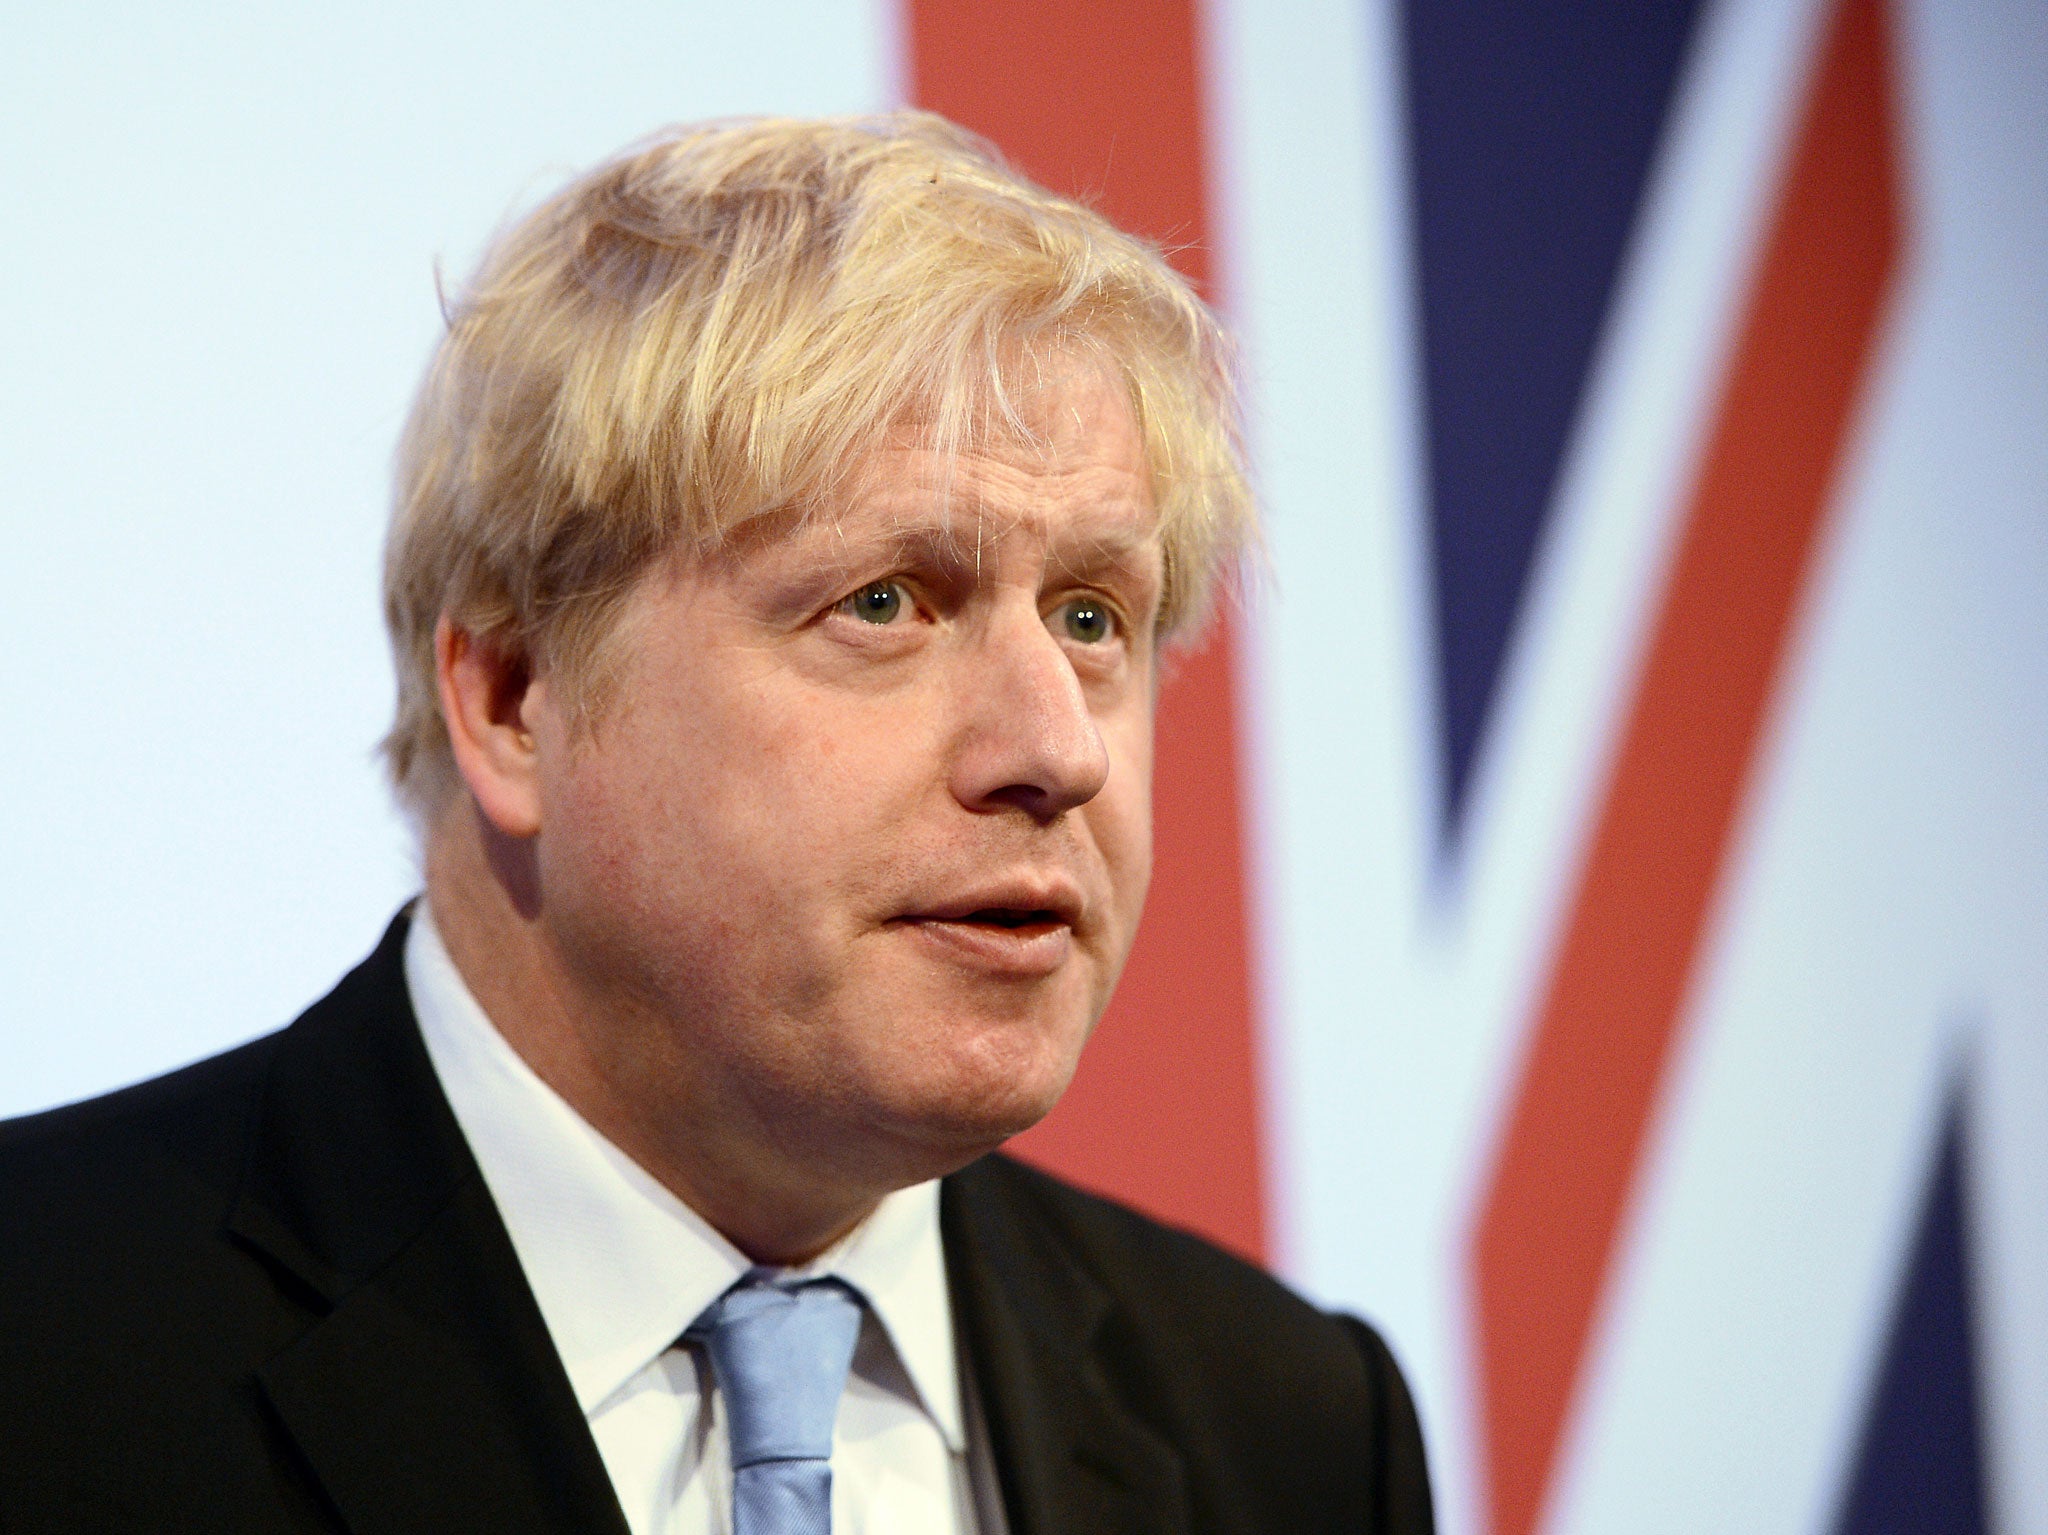 The Mayor of London said Spanish measures were 'infamous' and 'tantamount to a blockade'